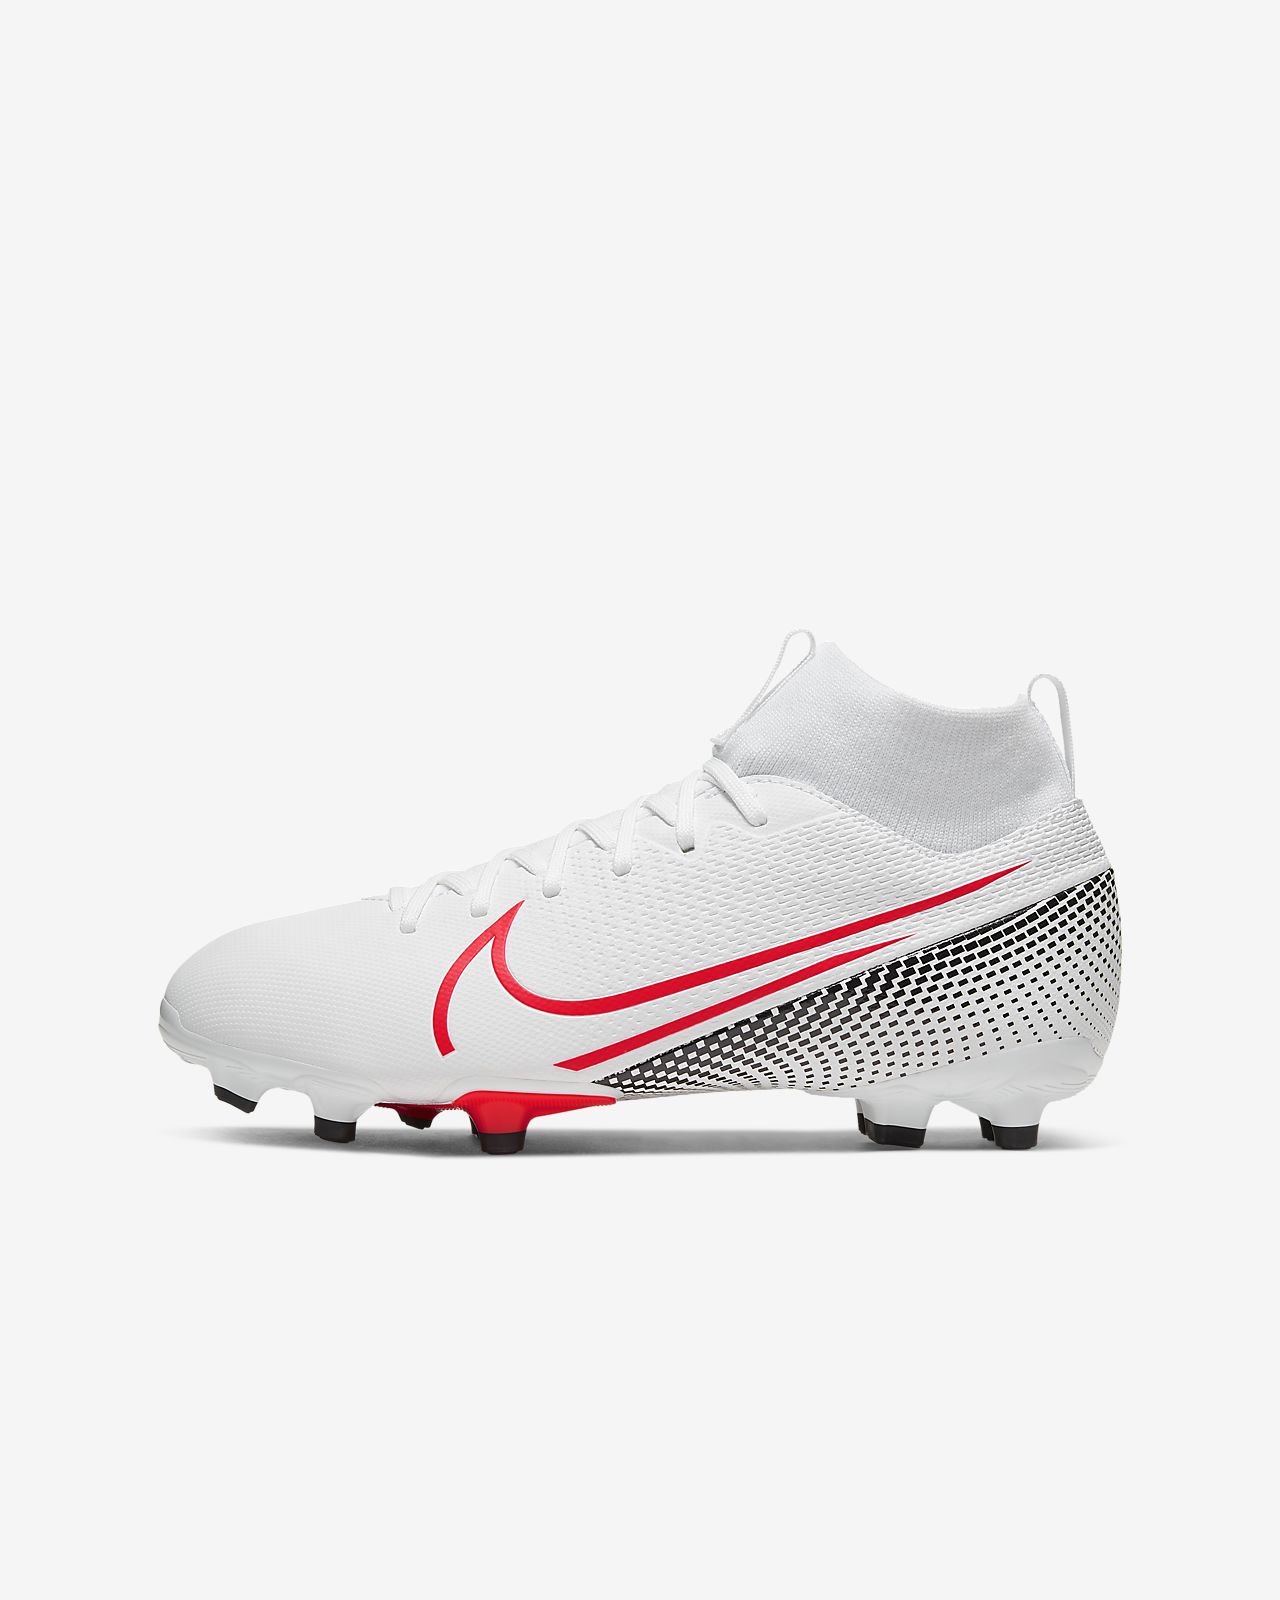 NIKE Superfly 6 Academy Kid's Firm Ground Soccer Cleats 4.